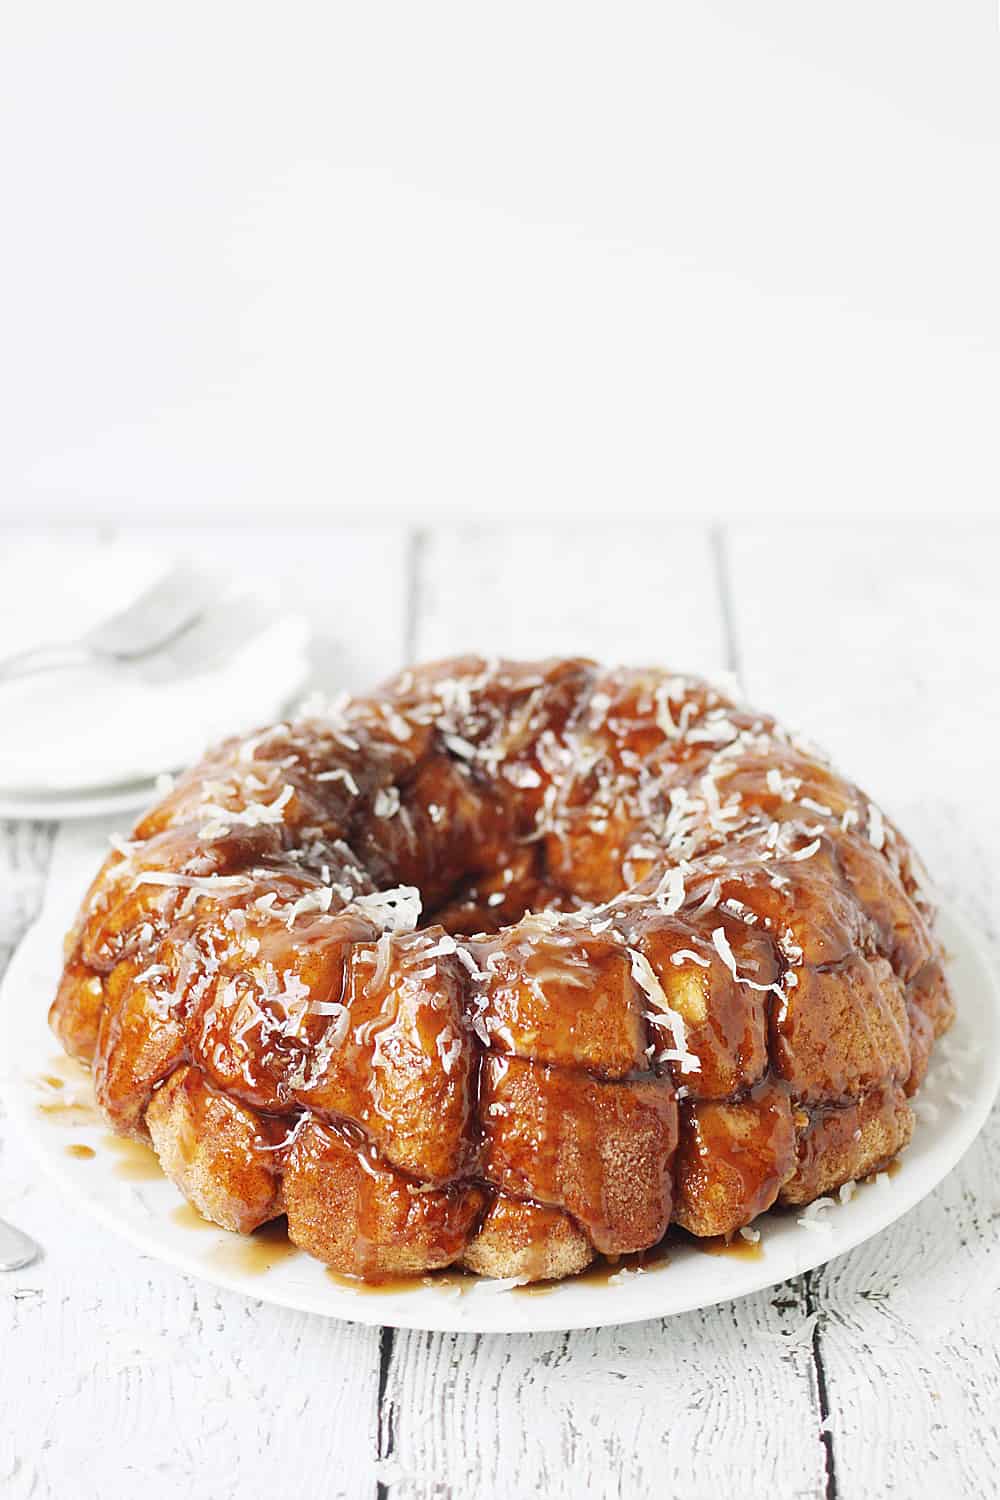 Easy Coconut Caramel Monkey Bread -- You'll want to lick every finger after eating this easy coconut caramel monkey bread! Pull-apart, cinnamon-coated bread is covered in gooey caramel sauce and sprinkled with sweet shredded coconut. It's to die for! #halfscratched #monkeybread #bread #dessert #easyrecipe #coconut #caramel